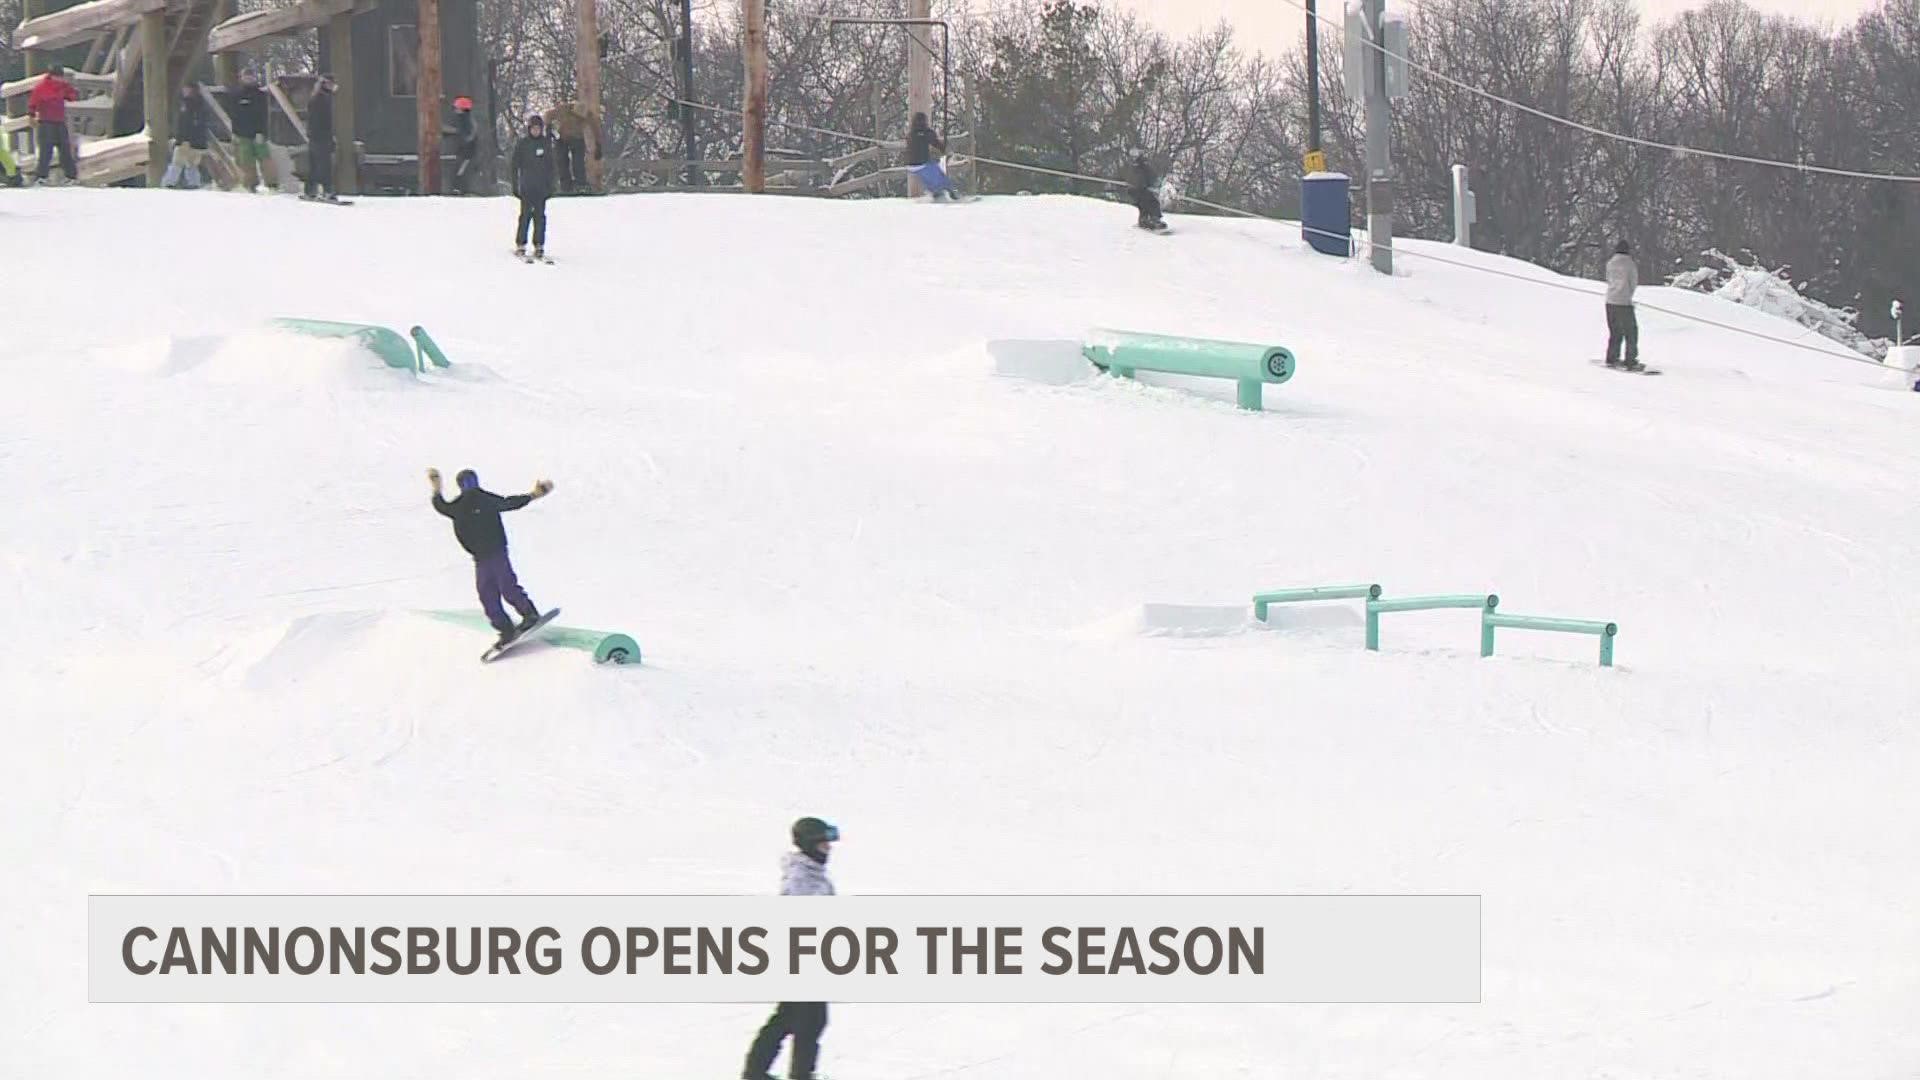 Skiers in West Michigan flock to Cannonsburg on opening day.